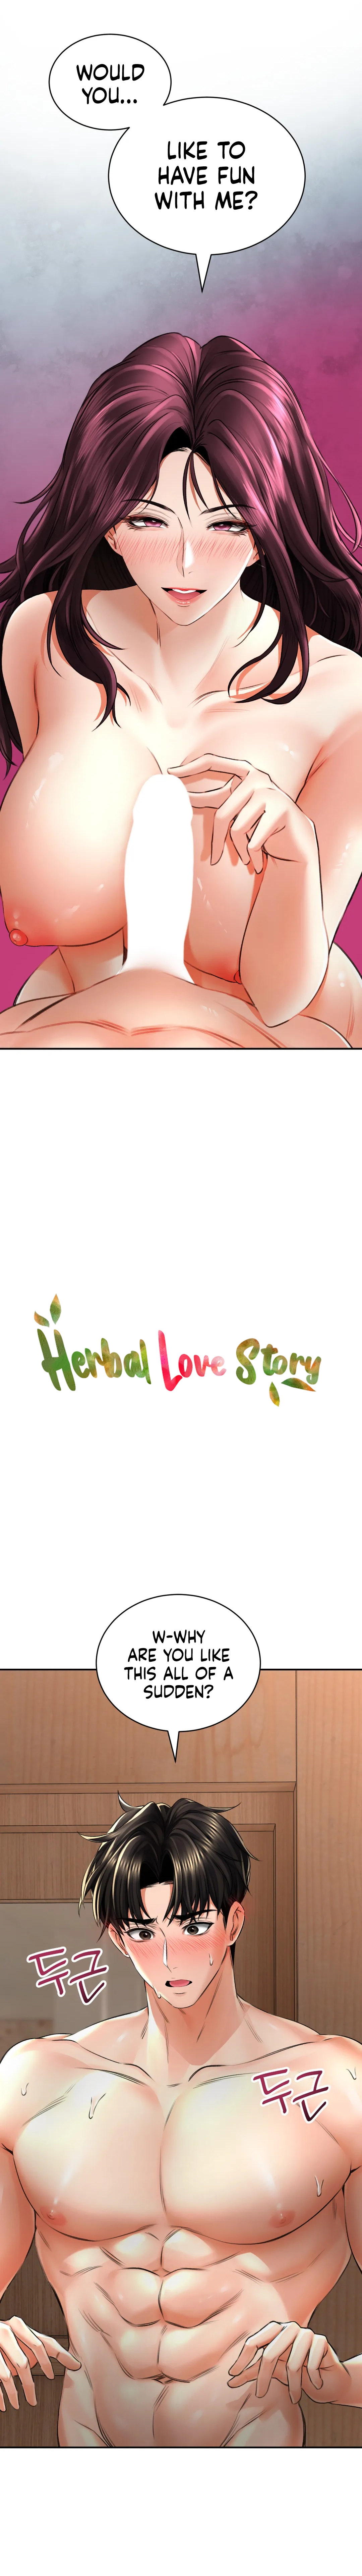 Herbal Love Story - Chapter 8 Page 2